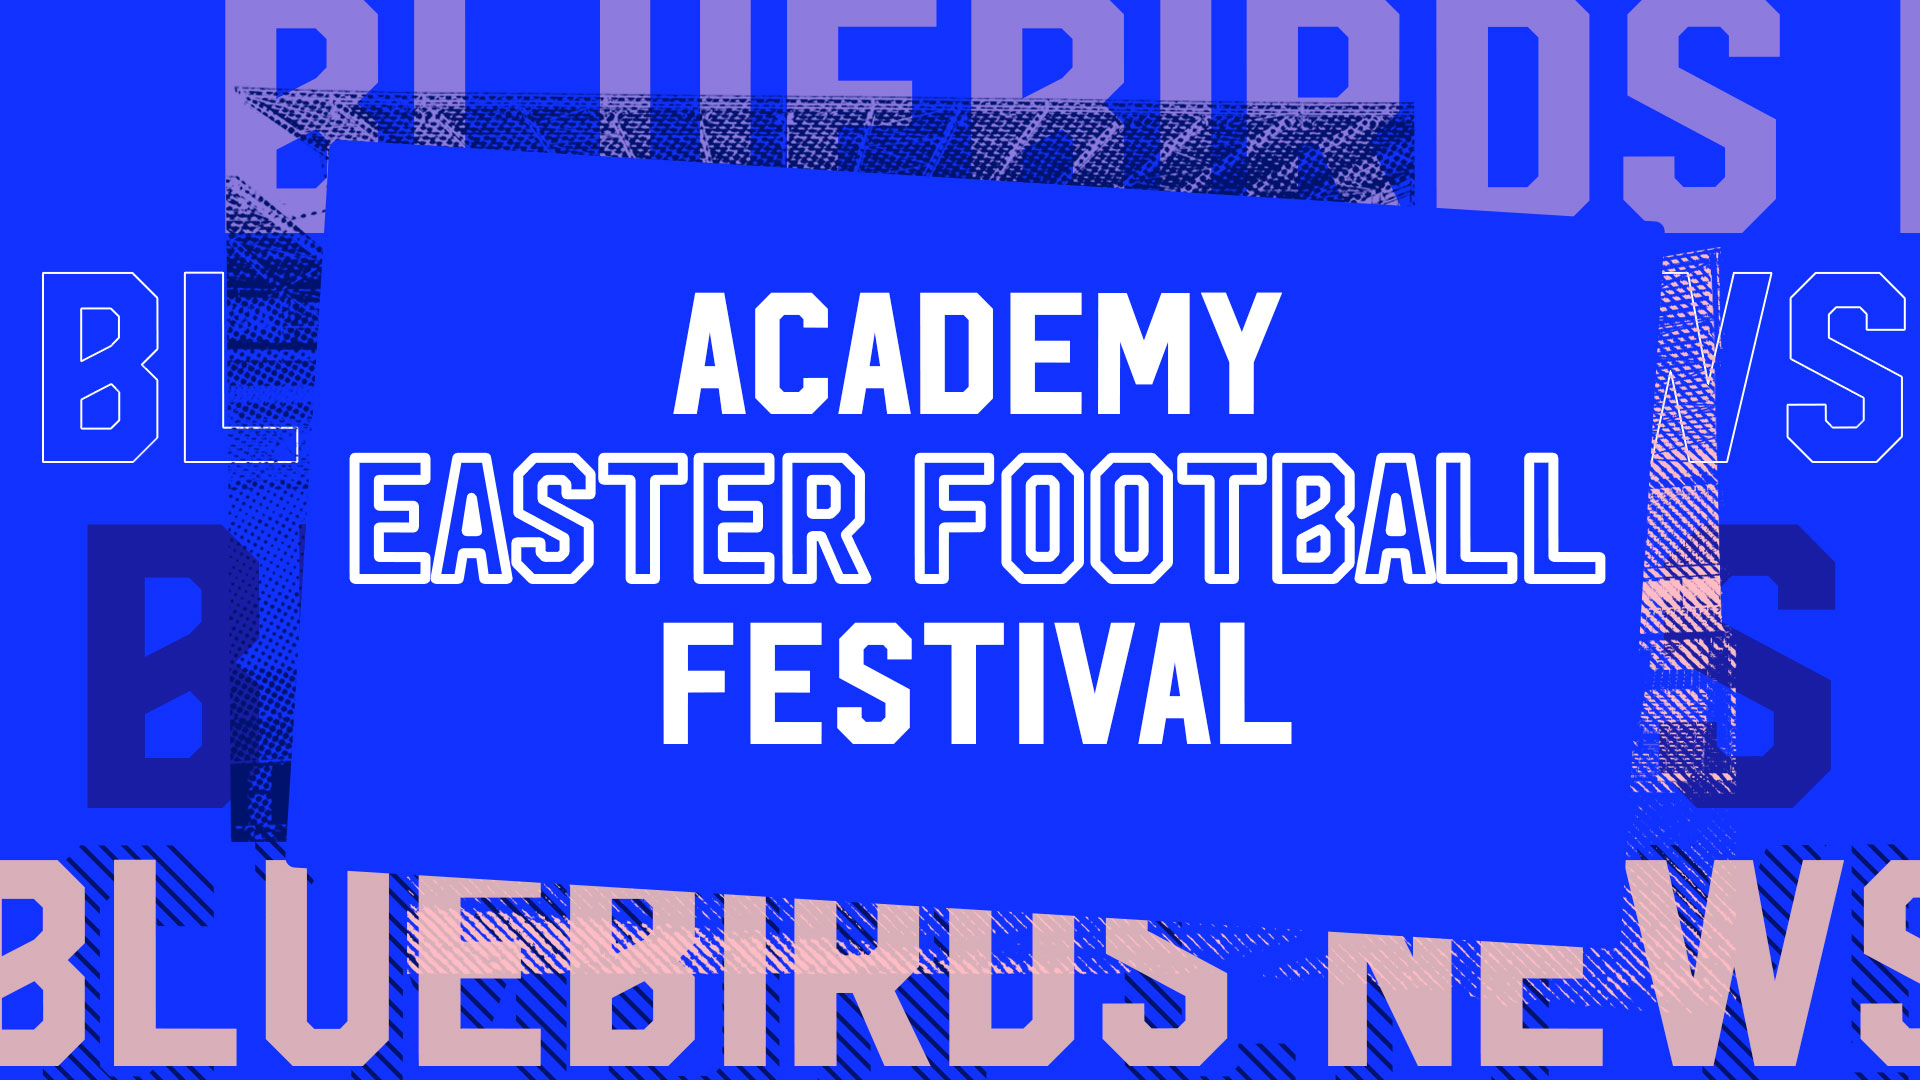 The Bluebirds are hosting an Academy Easter Football Festival this Saturday...